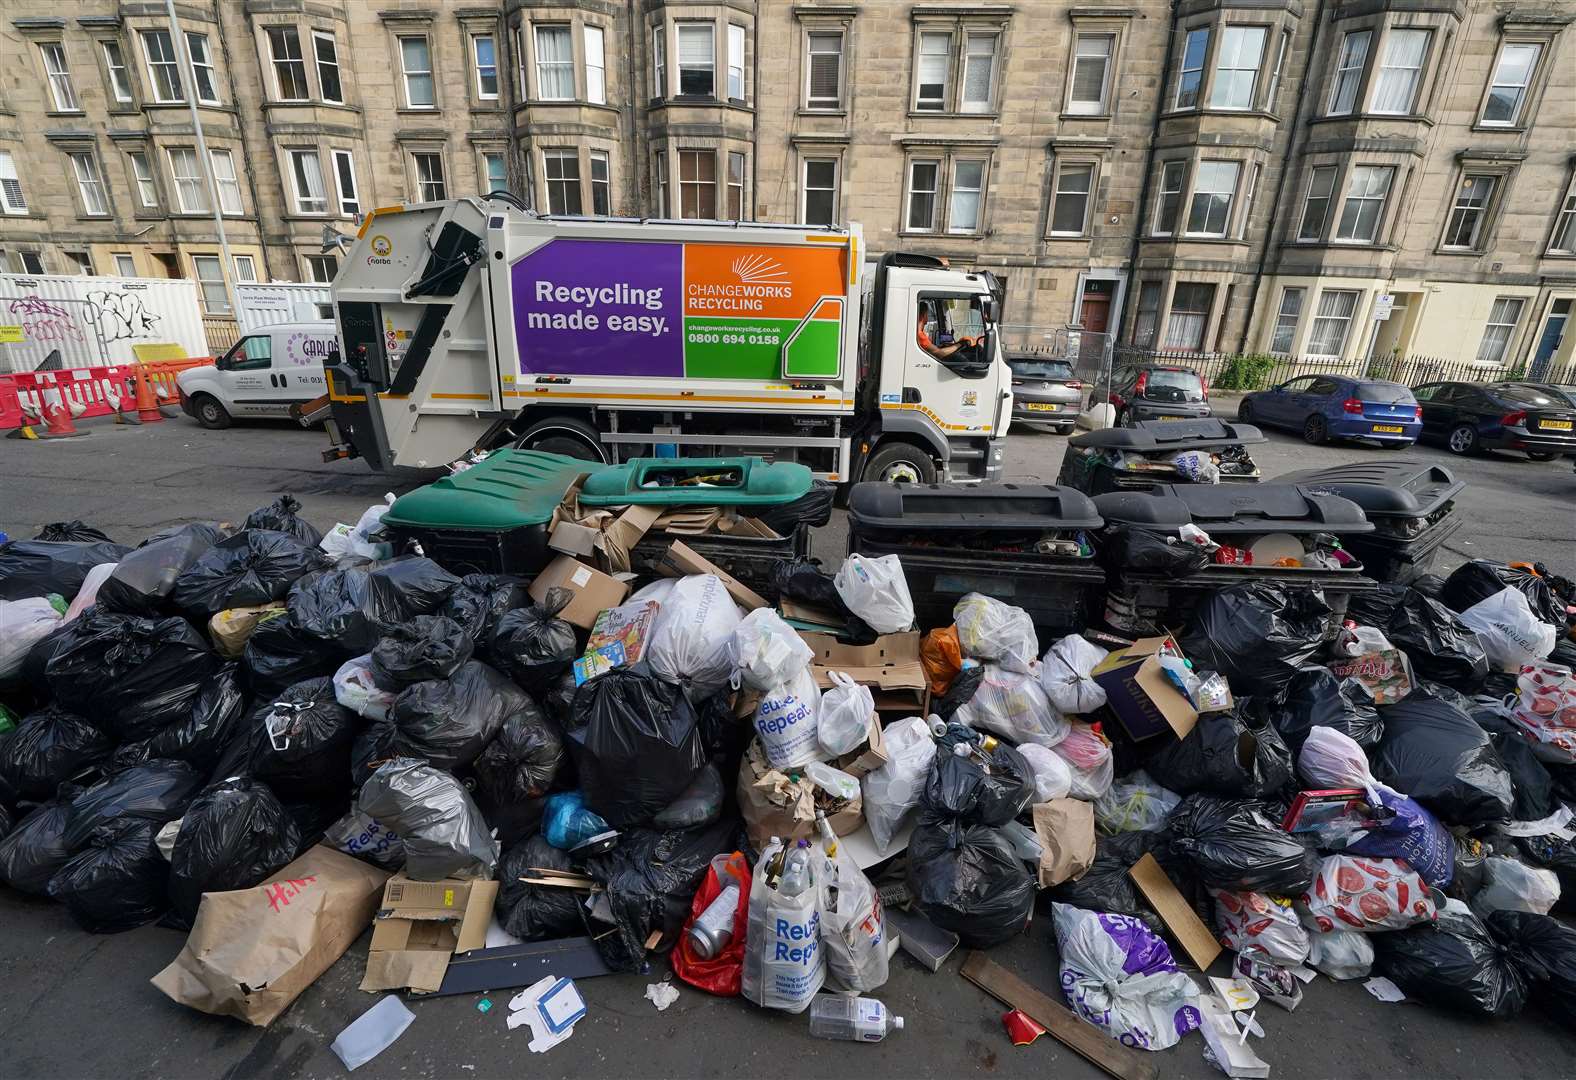 Further waste strikes were called off after rubbish piled up in Edinburgh (PA)